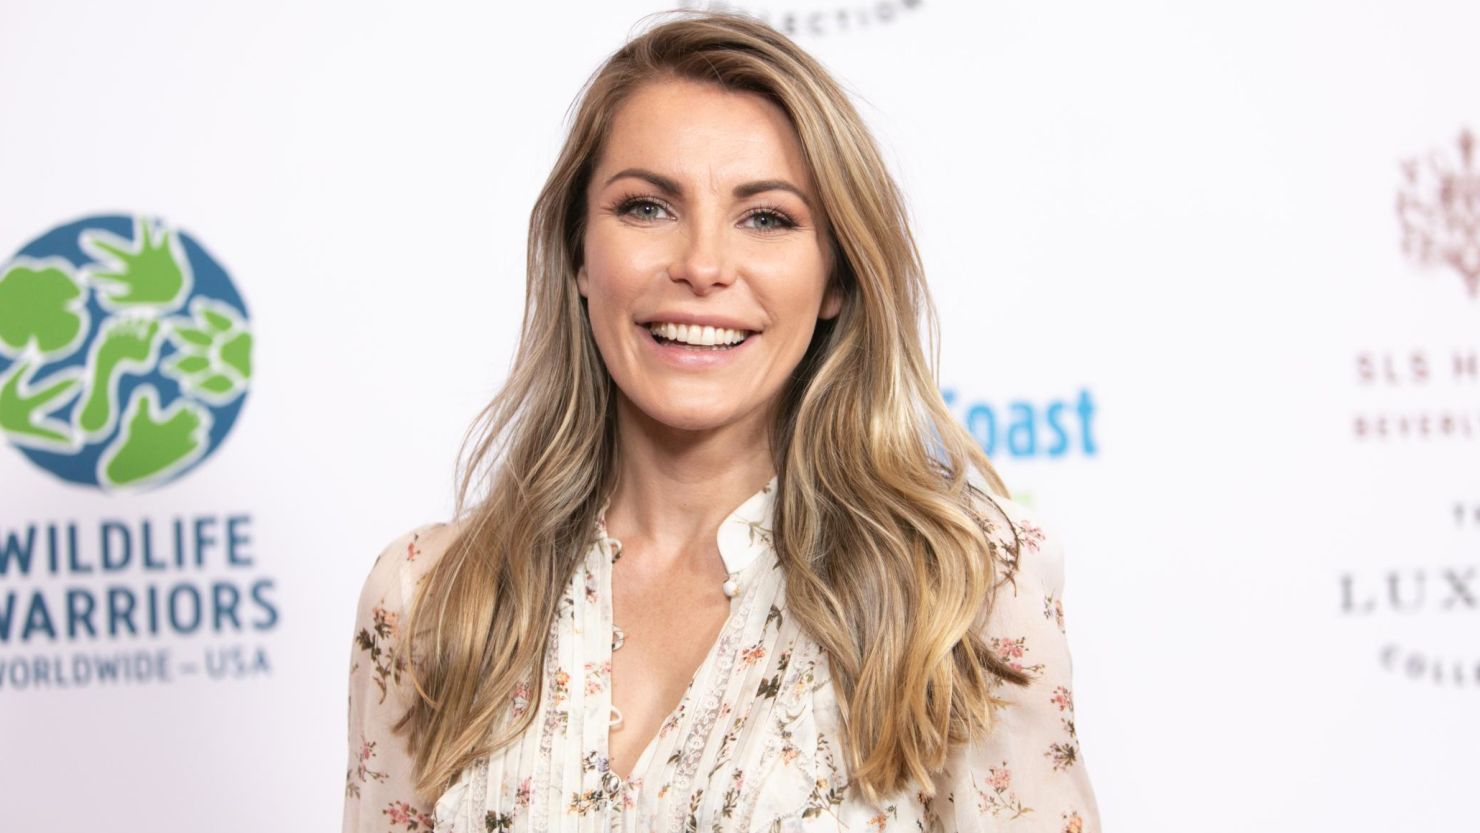 Crystal Hefner, here in 2019, says she's feeling more authentic after making some changes.